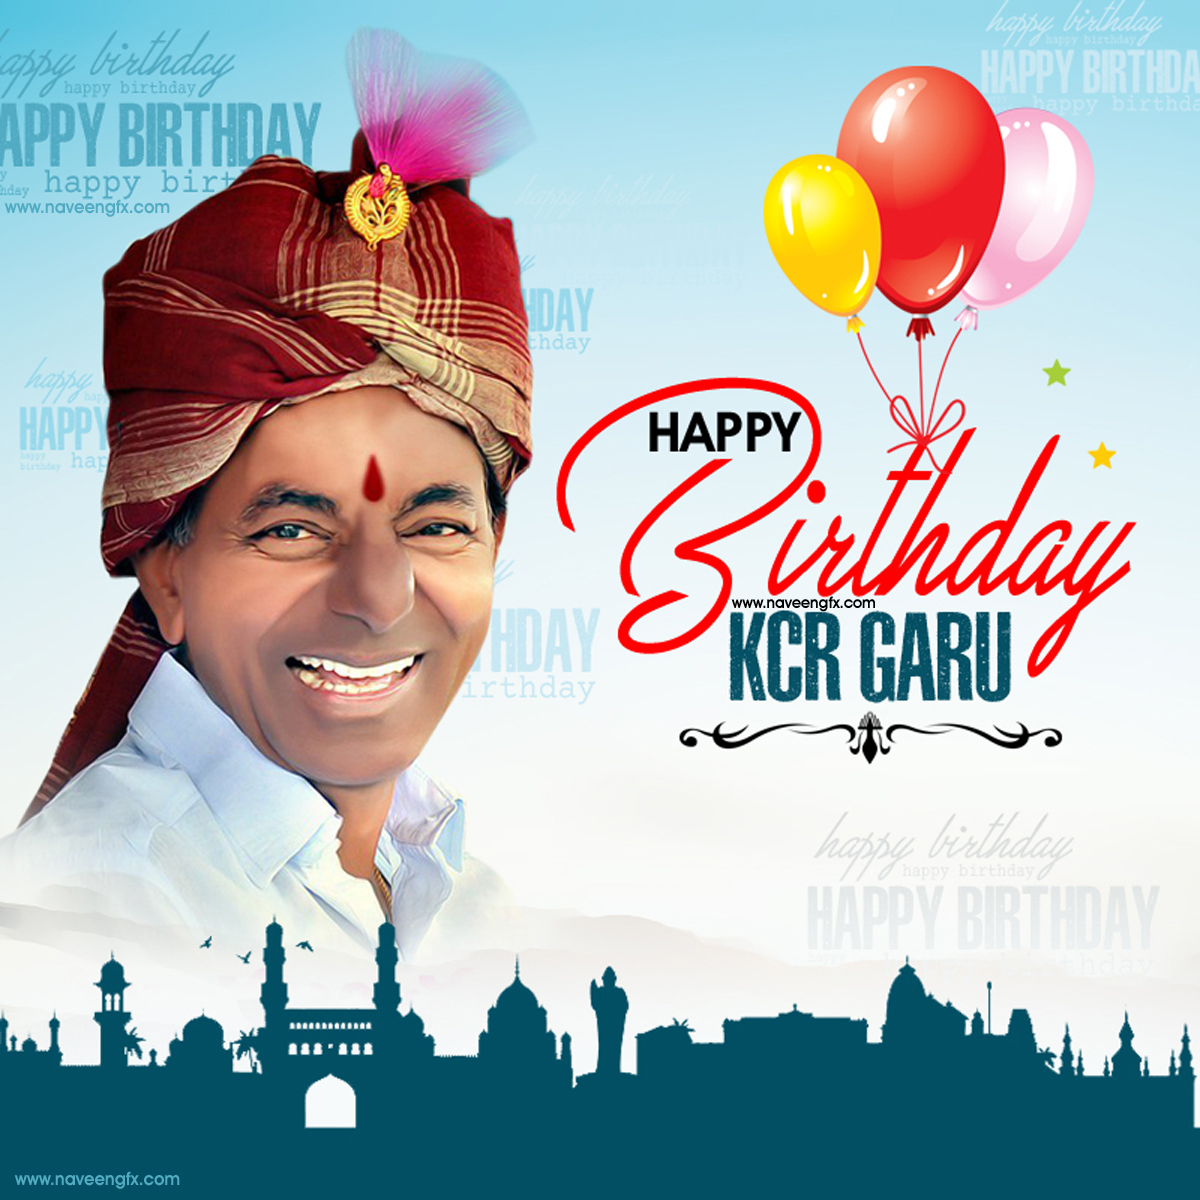 cm kcr birthday wishes and greetings hd poster design ... - 1200 x 1200 jpeg 728kB